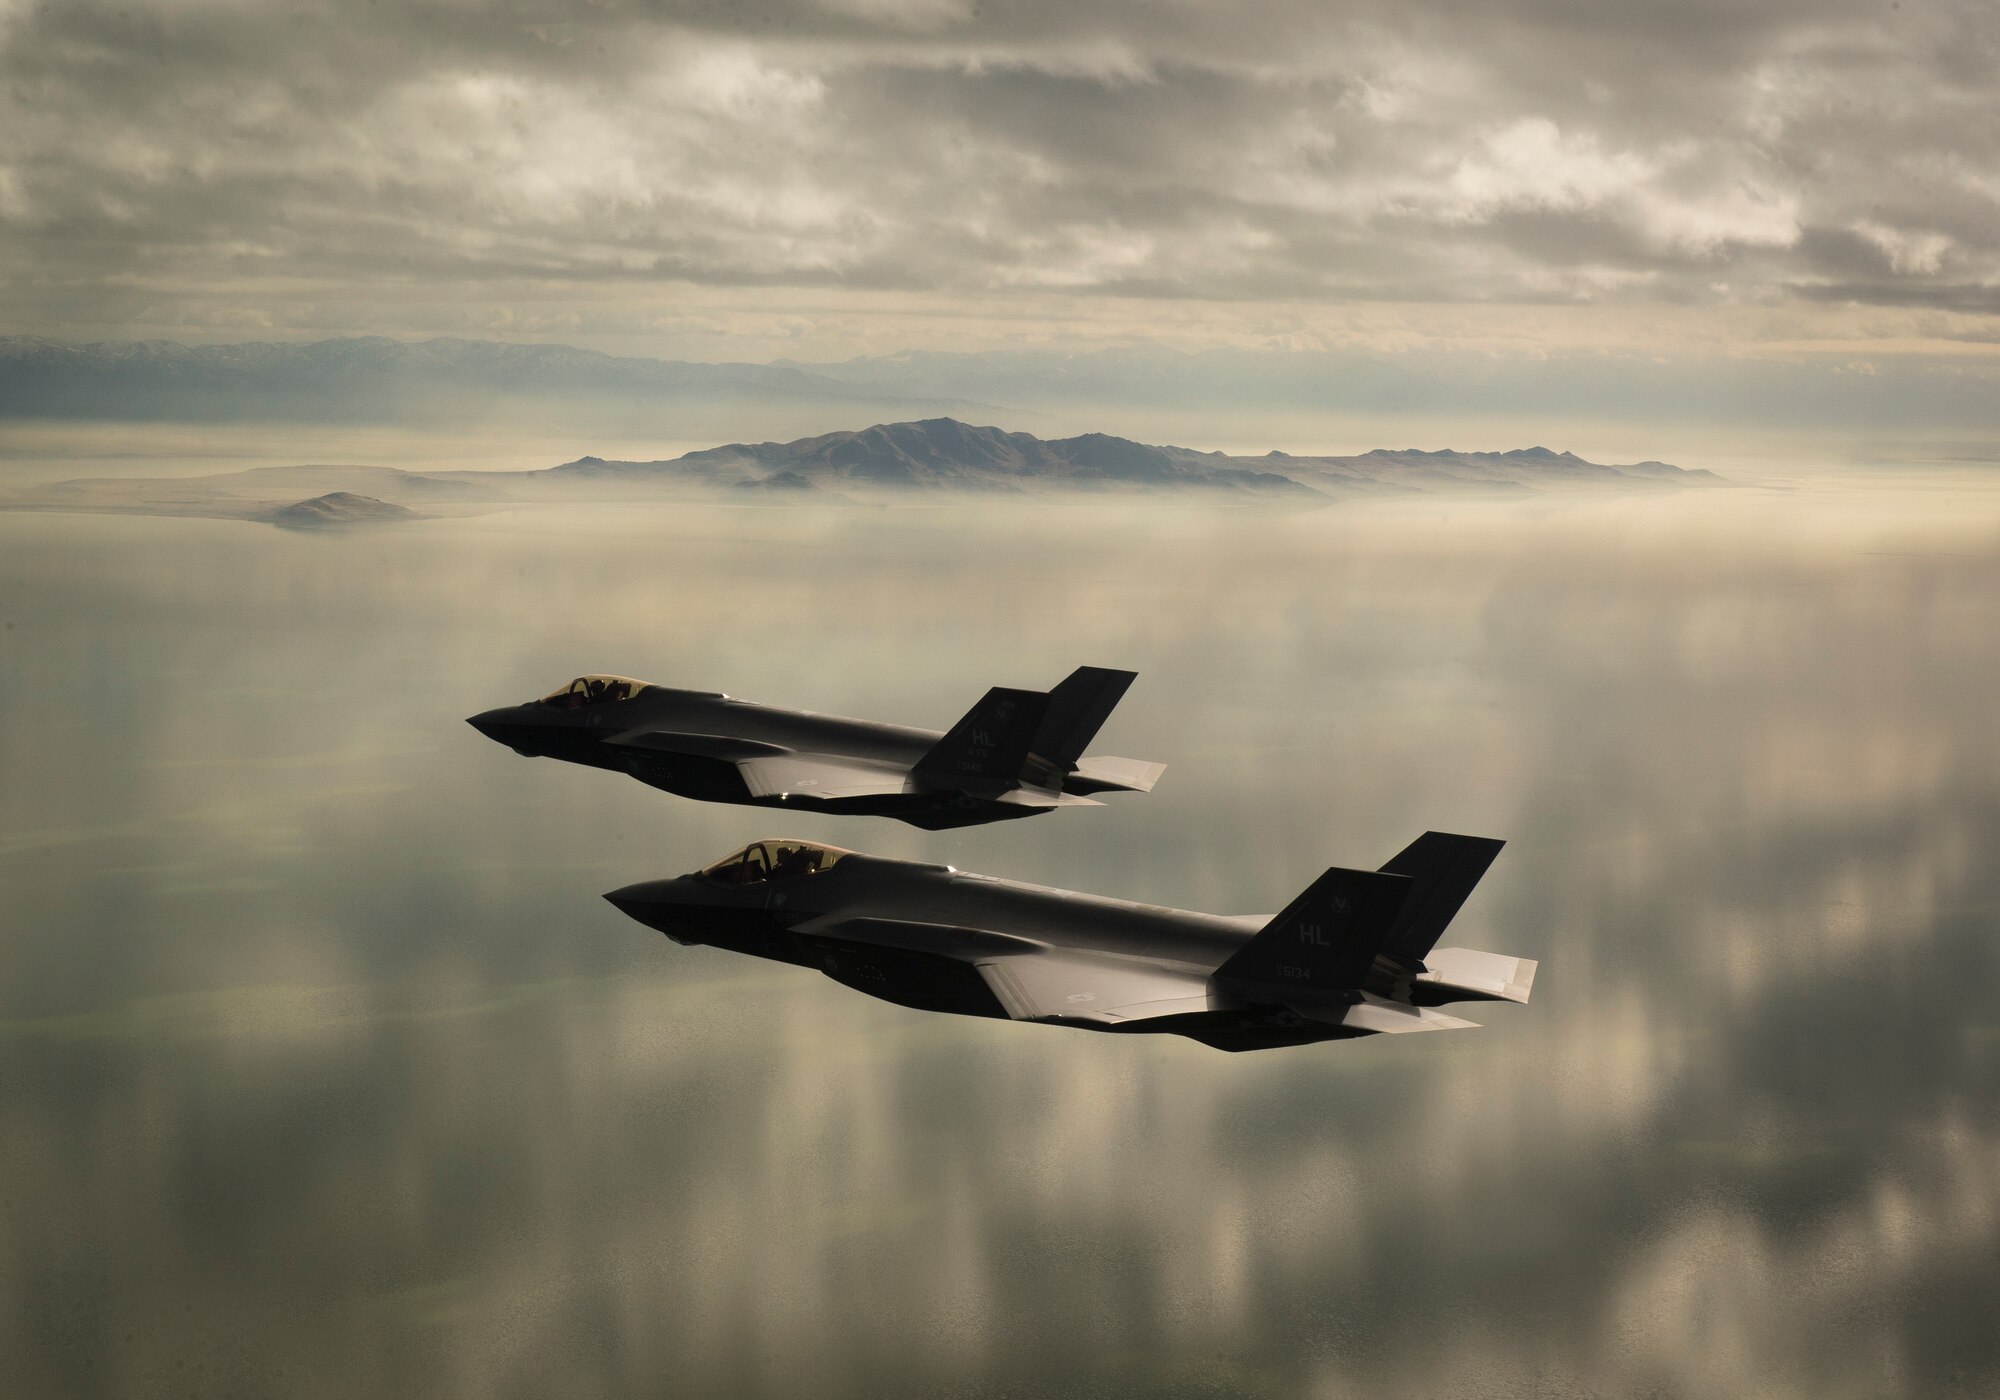 Two F-35A Lightning IIs, assigned to the 4th Fighter Squadron from Hill Air Force Base, Utah, conduct flight training operations over the Utah Test and Training Range on Feb 14, 2018. The F-35A is a single-seat, single engine, fifth generation, multirole fighter that’s able to perform ground attack, reconnaissance and air defense missions with stealth capability. (U.S. Air Force photo by Staff Sgt. Andrew Lee)